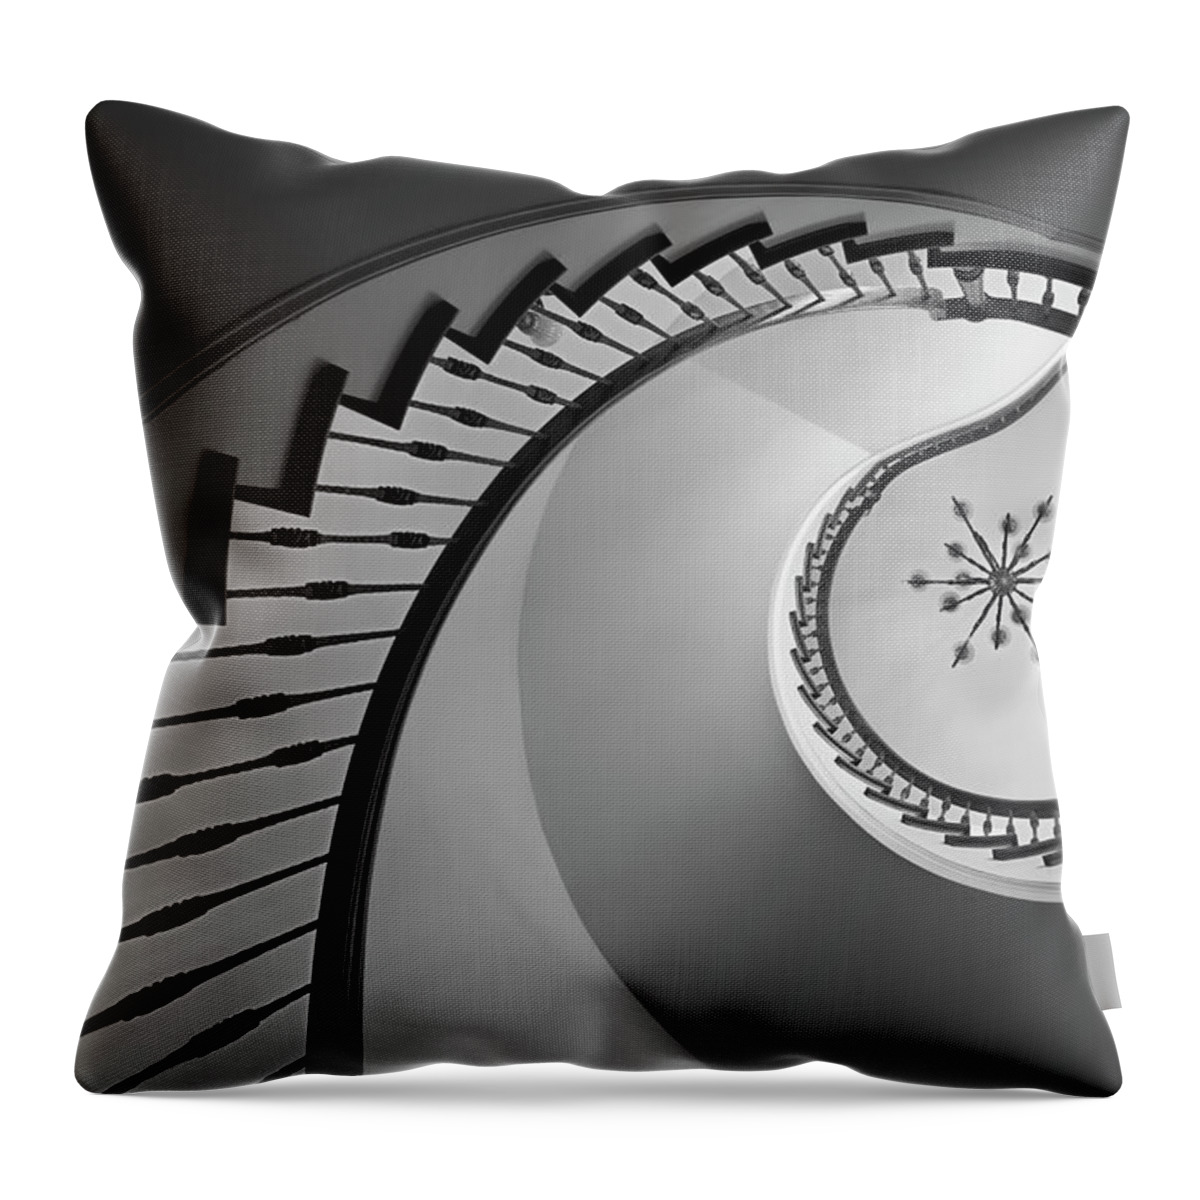 Steps Throw Pillow featuring the photograph Spiral Staircase by Rudisill